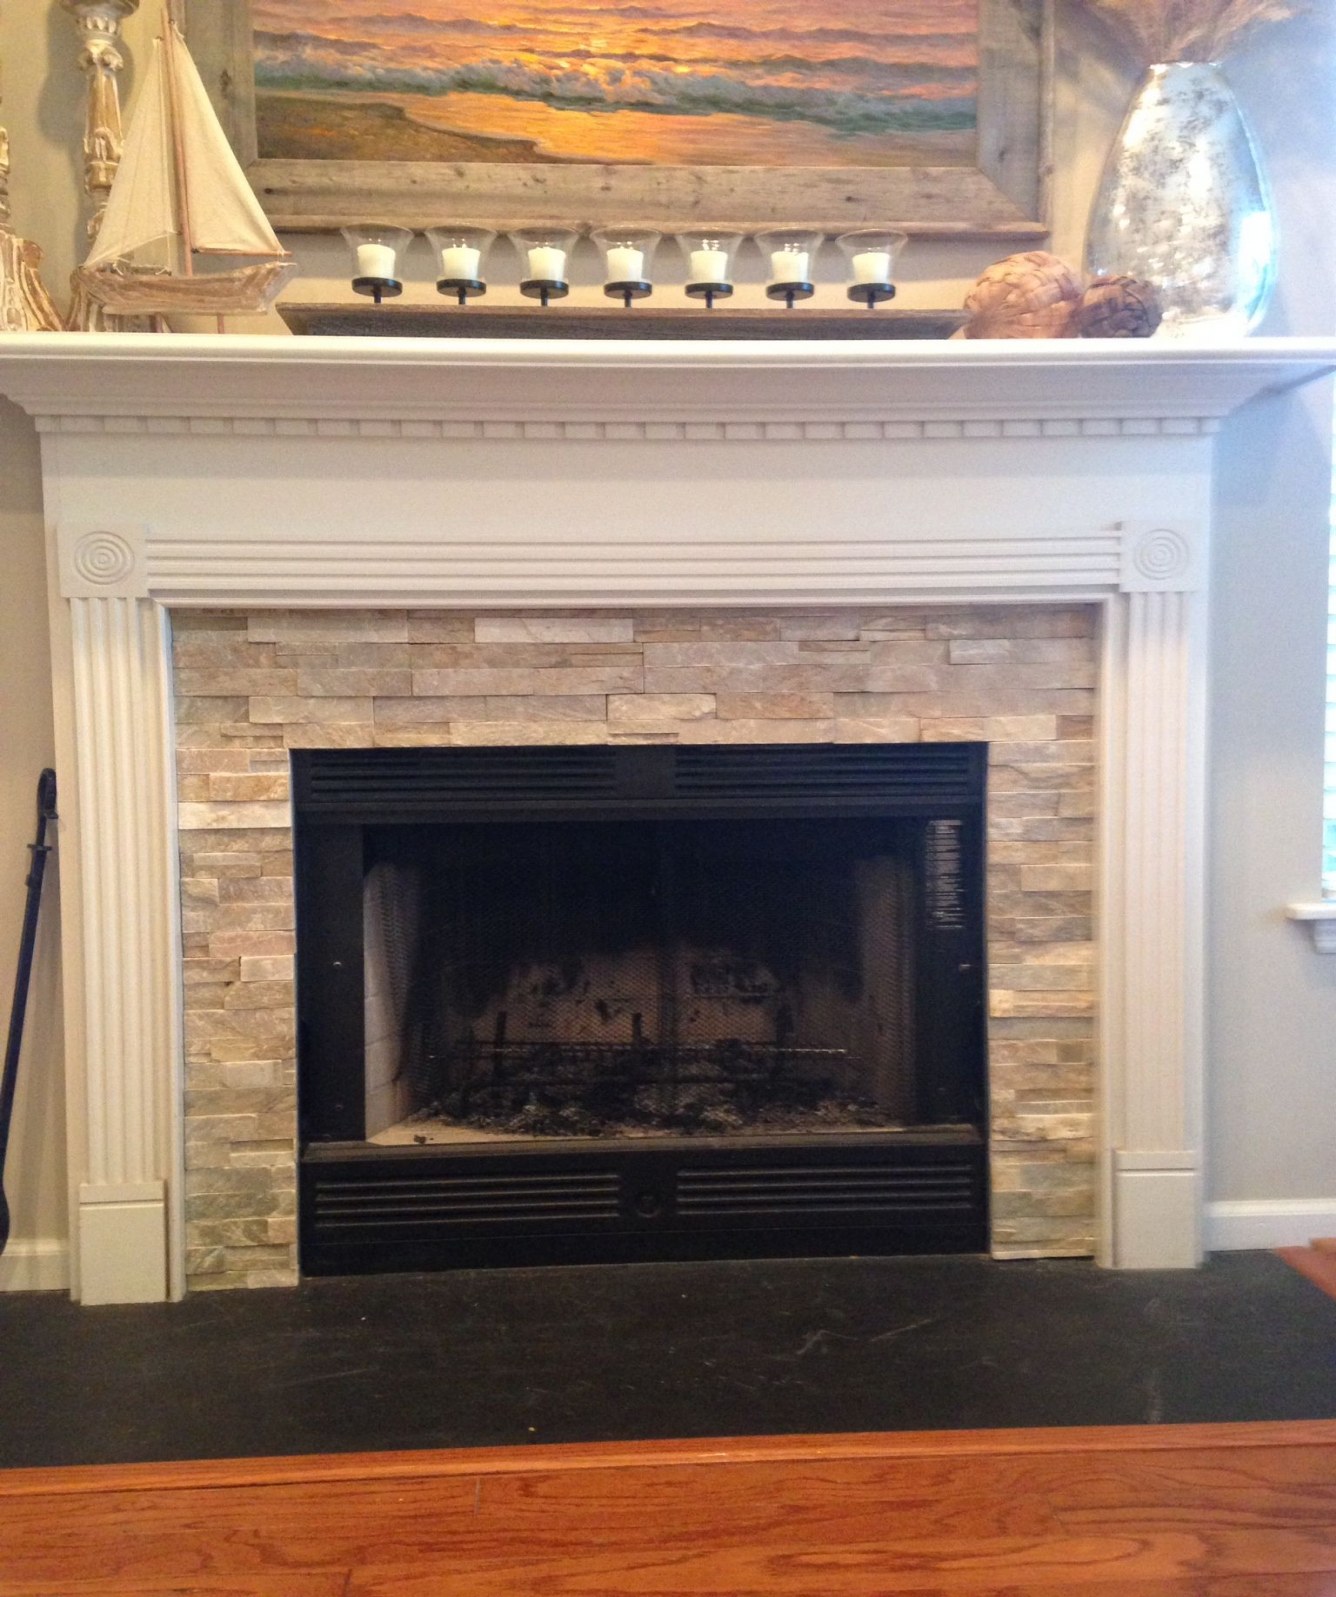 Fake Fireplaces Sale Awesome Fake Fireplace Ideas Faux Fireplace Ideas Can Also Include